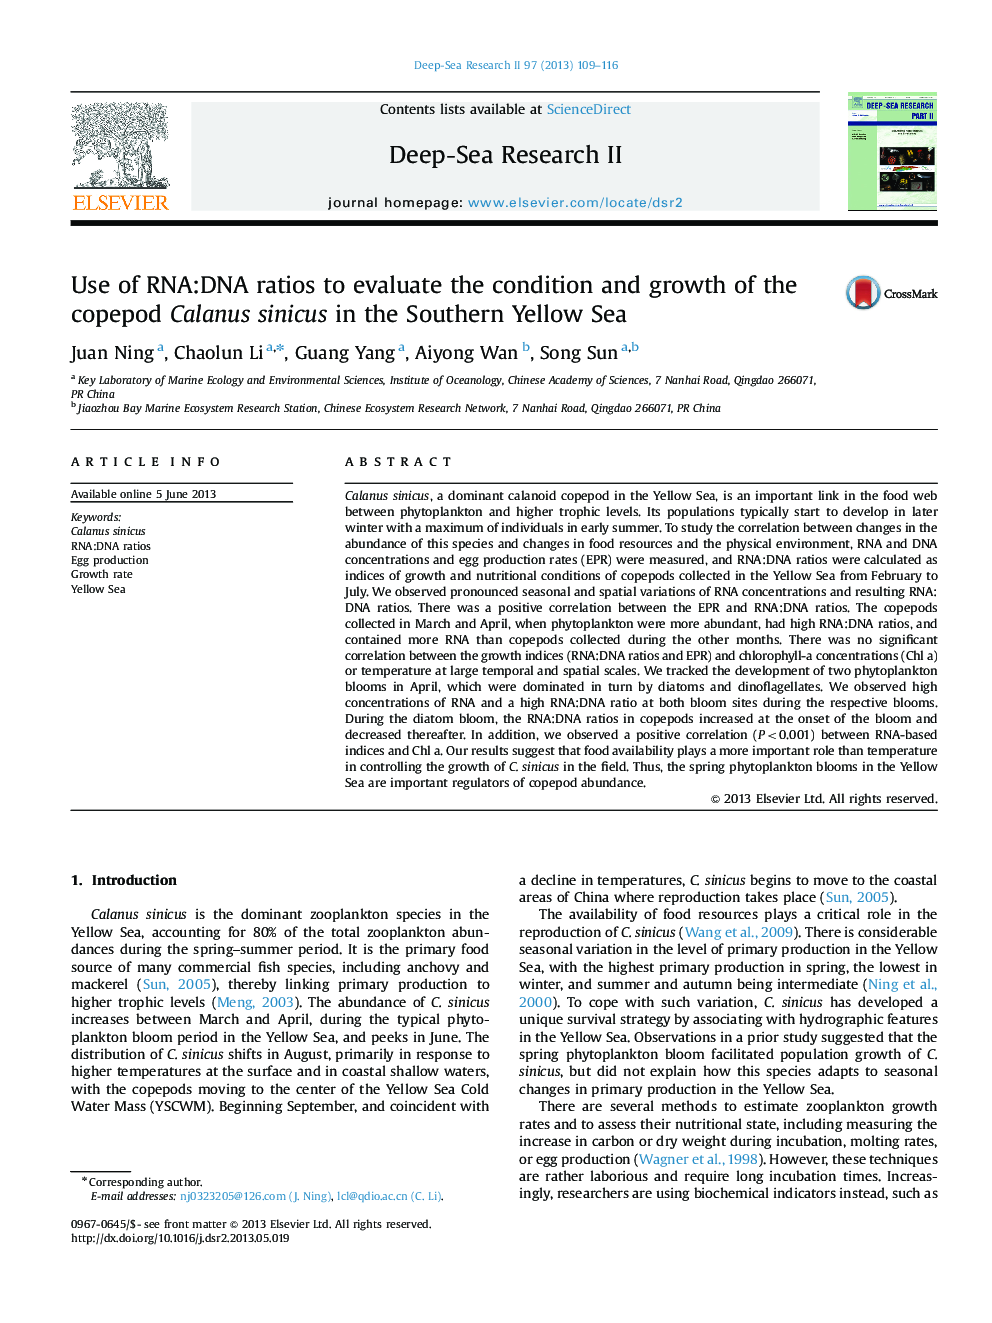 Use of RNA:DNA ratios to evaluate the condition and growth of the copepod Calanus sinicus in the Southern Yellow Sea